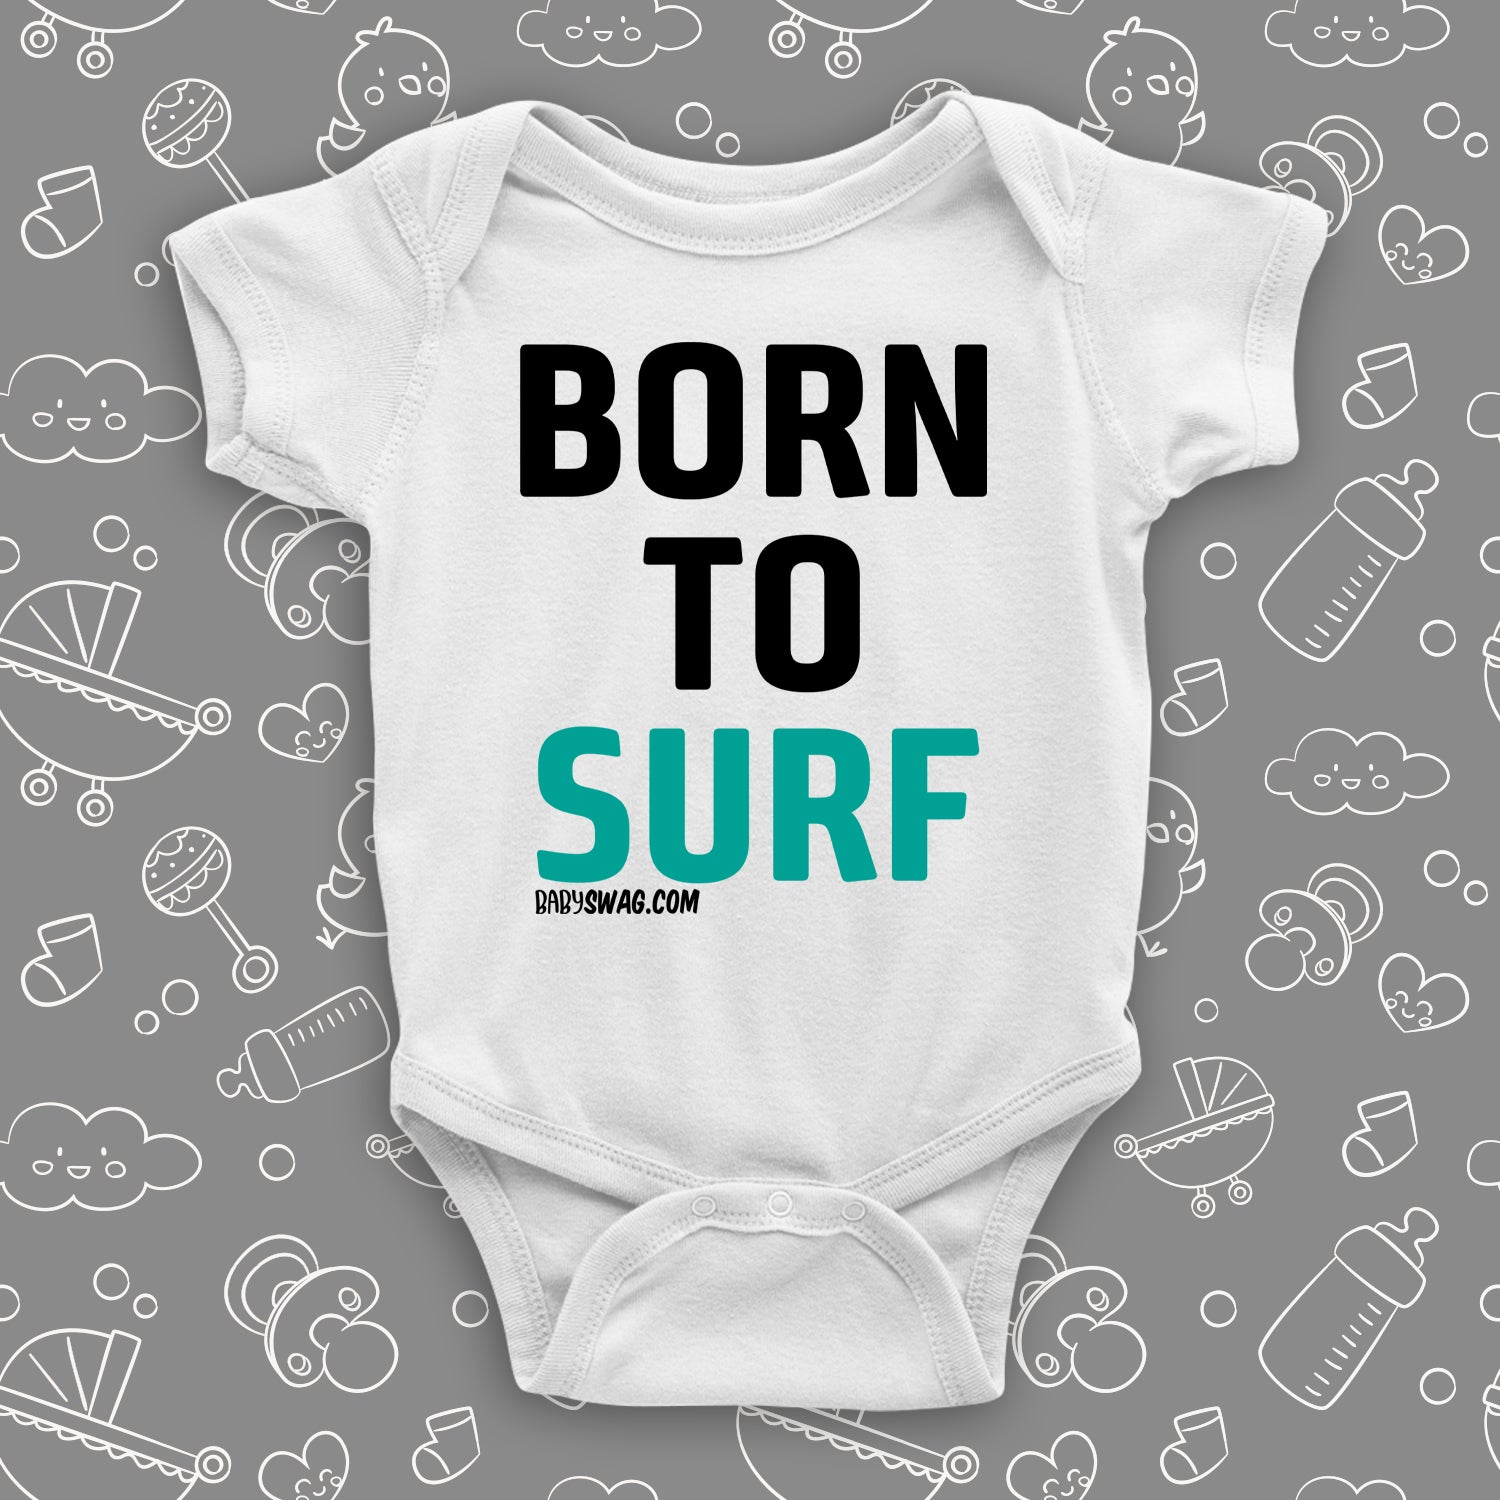 The "Born To Surf" baby onesies in white.